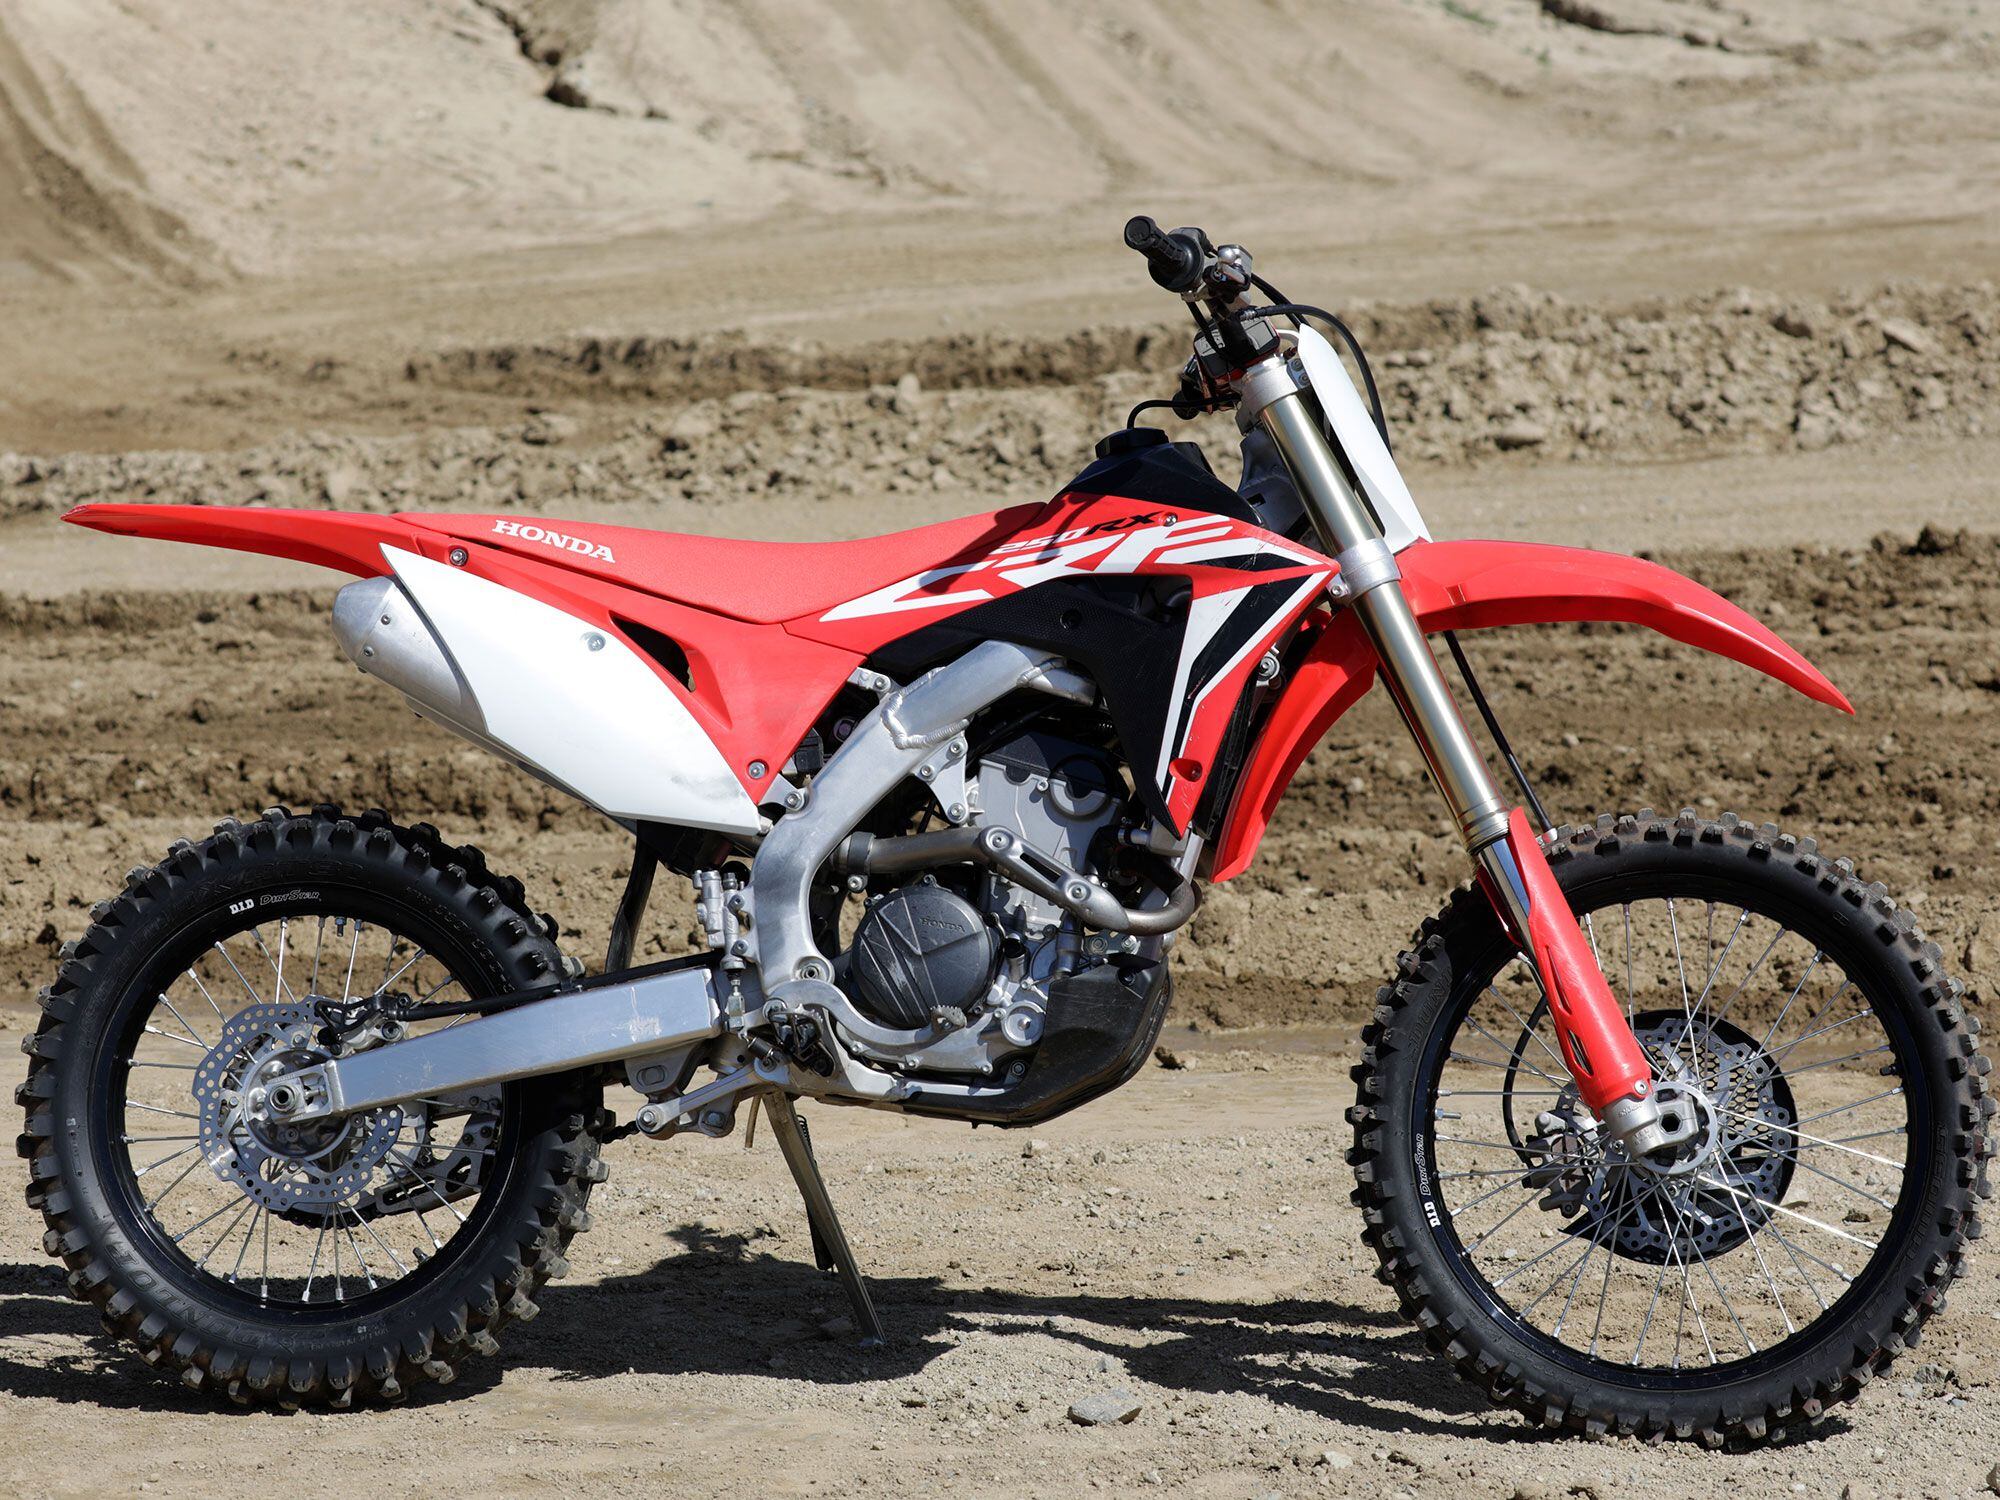 Honda offers a kinder and more gentle liquid-cooled 250cc dirt bike with the 2021 CRF250RX.